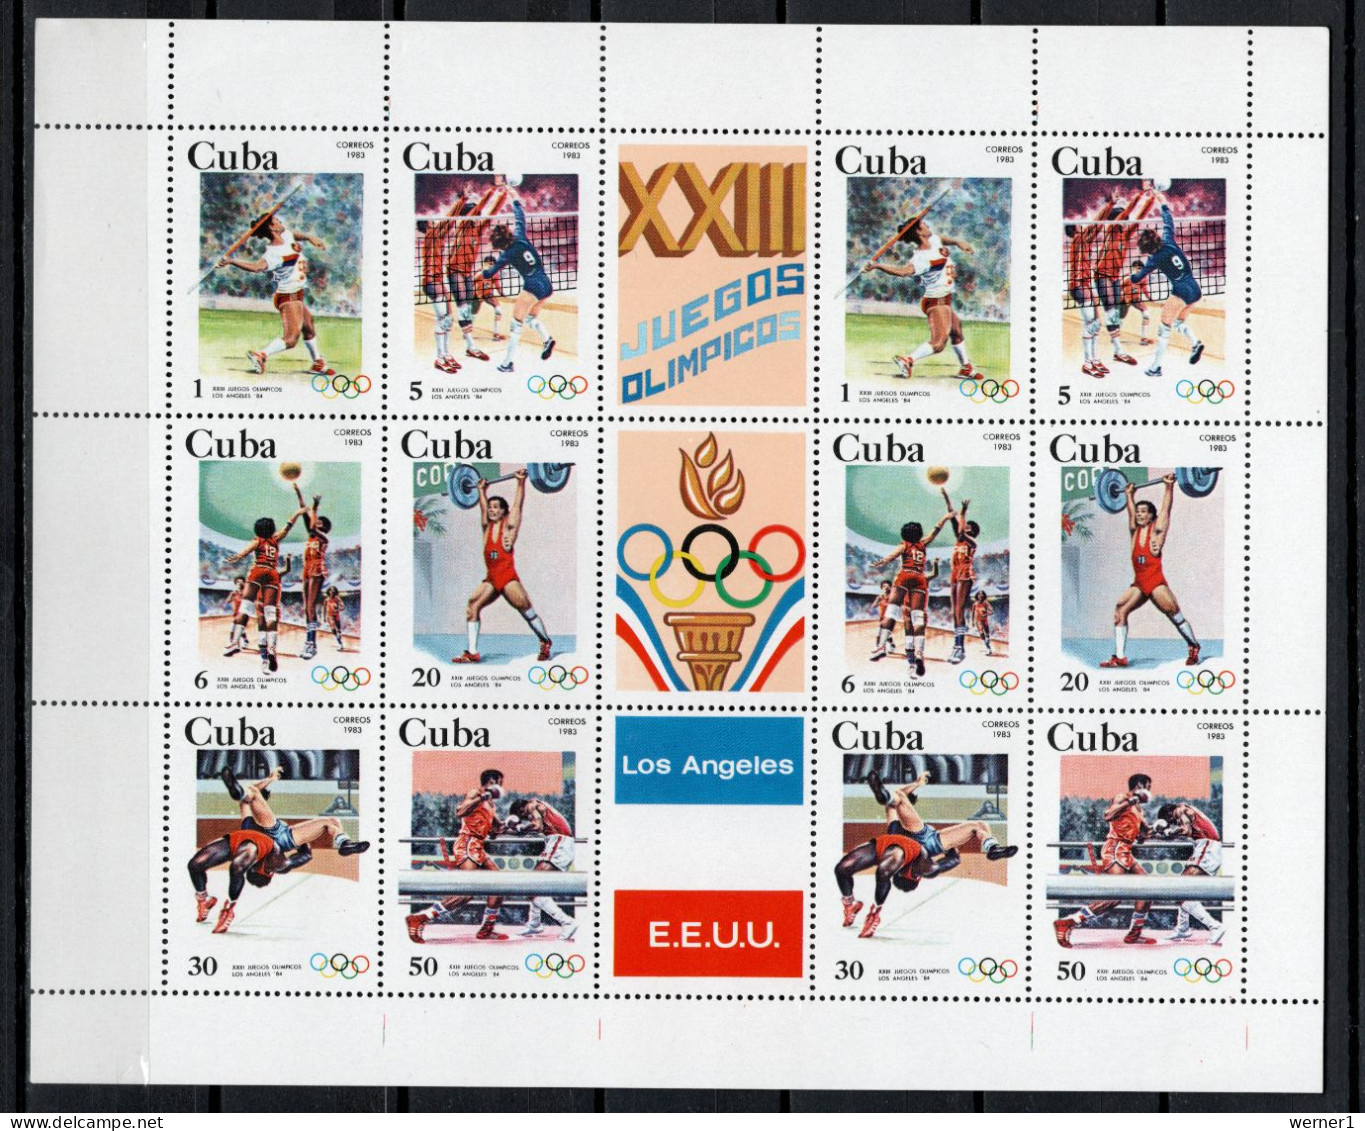 Cuba 1983 Olympic Games Los Angeles, Javelin, Volleyball, Basketball, Wrestling Etc. Sheetlet MNH - Verano 1984: Los Angeles